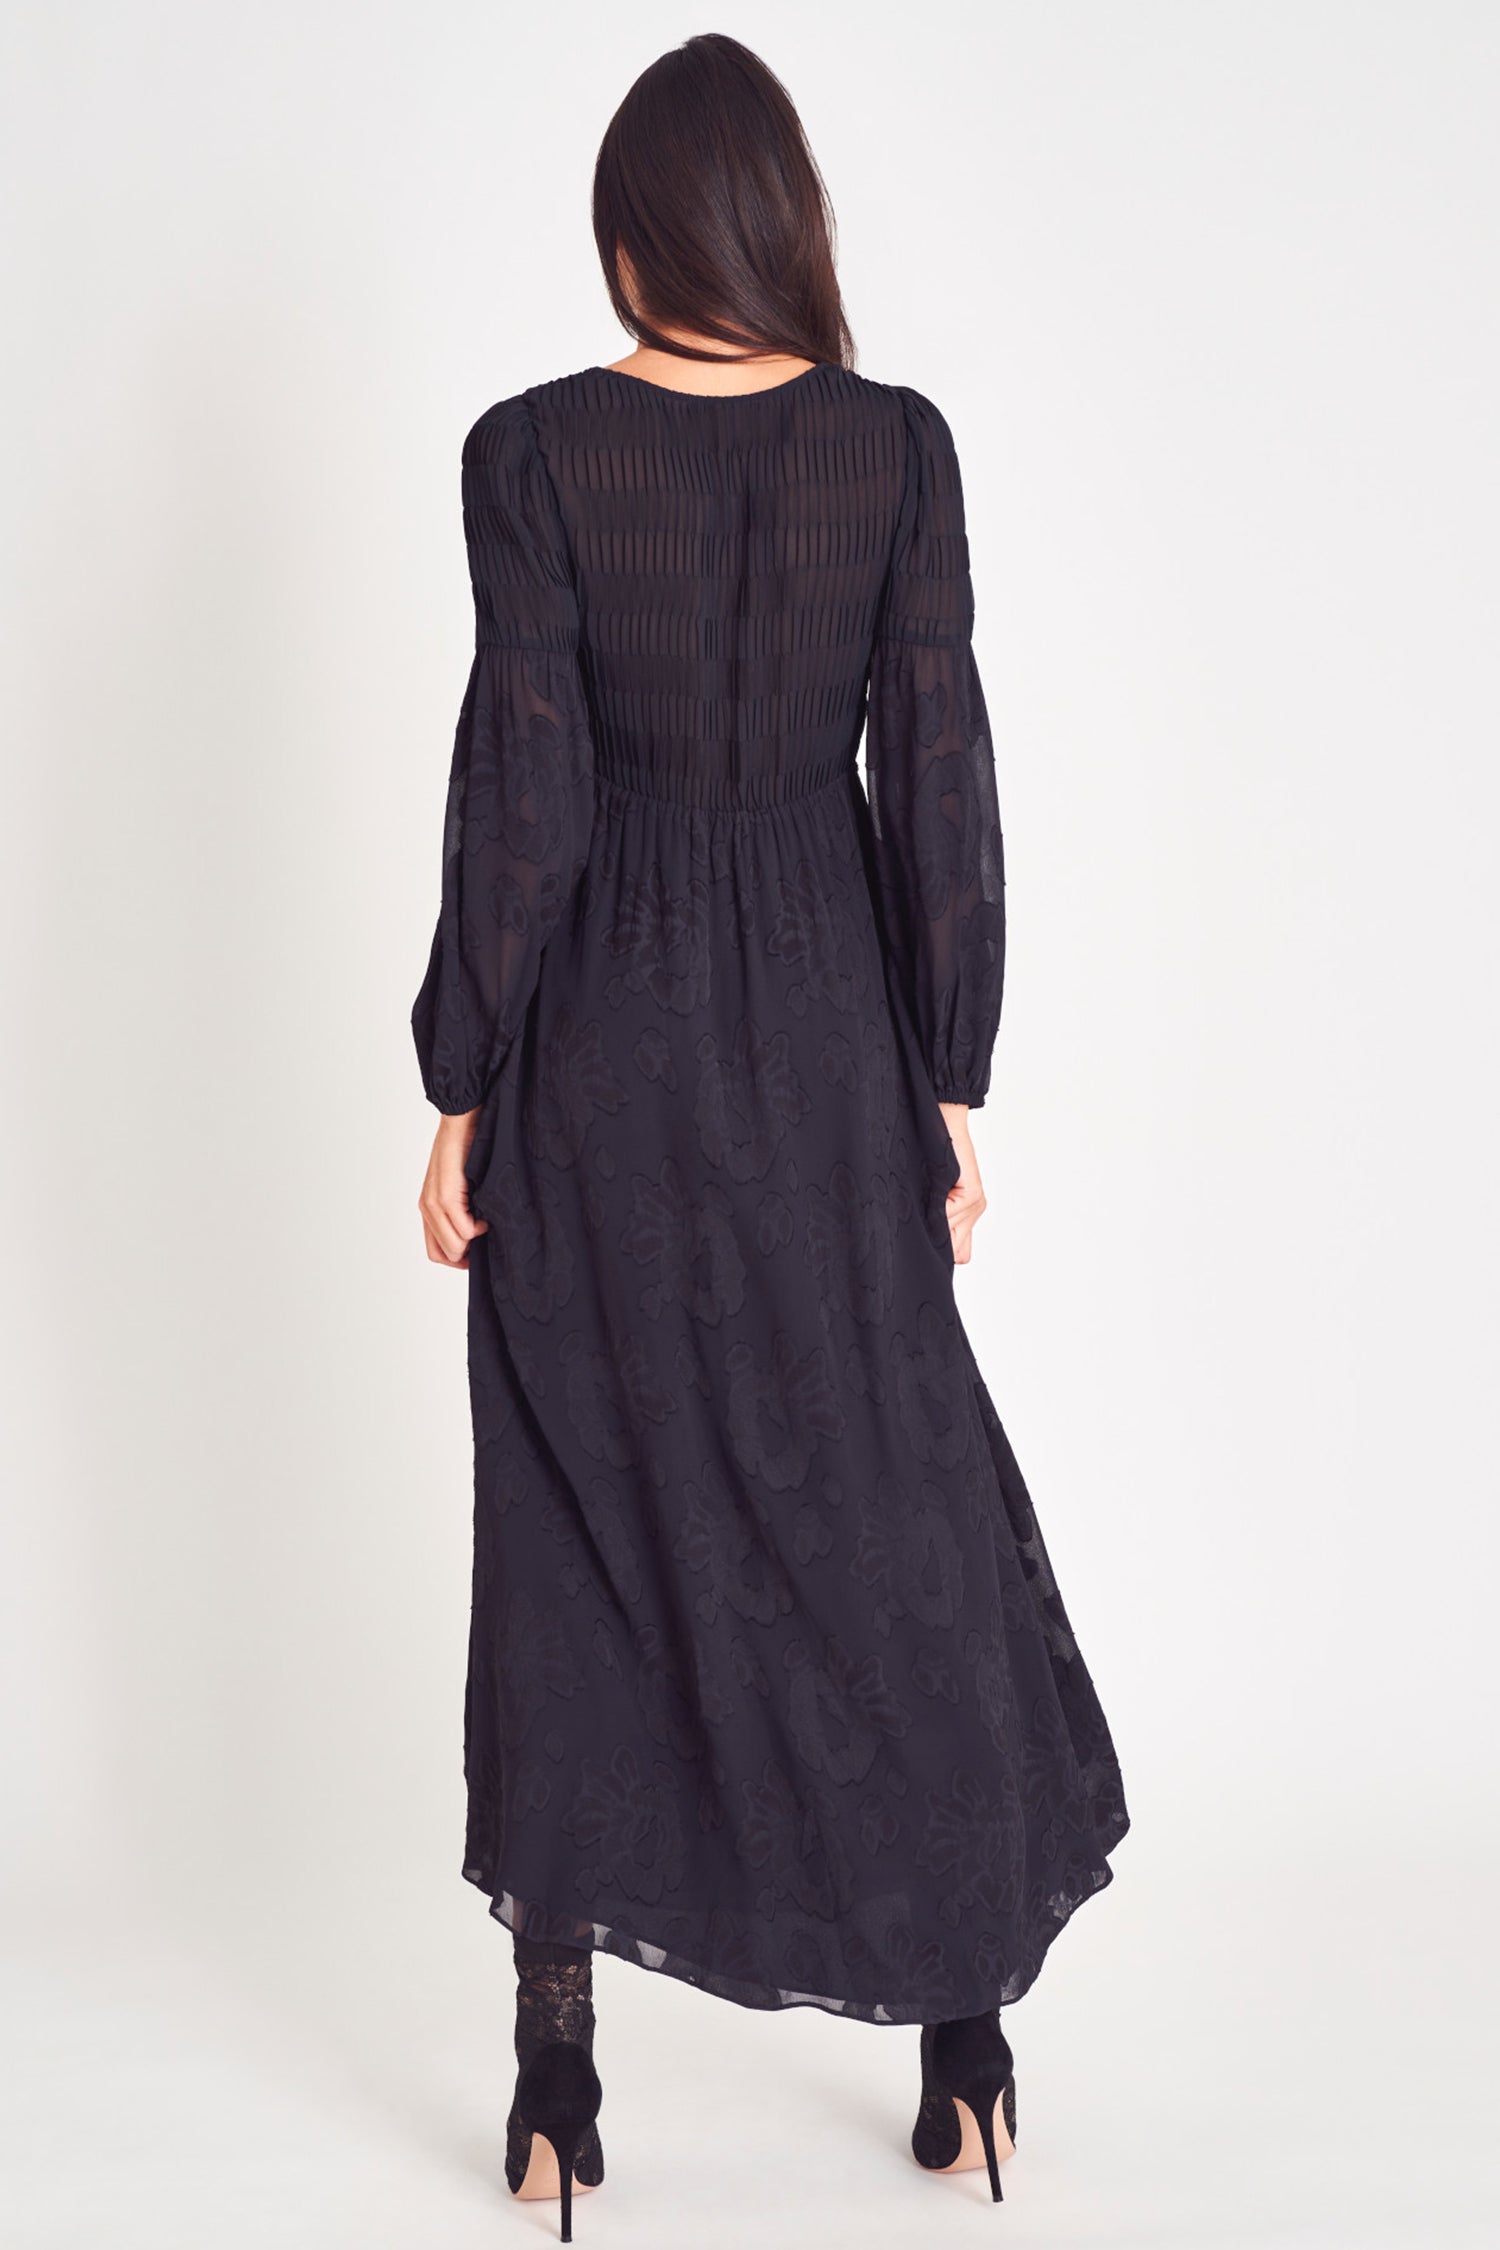 Black v neck long sleeve maxi dress with floral jacquard and pleated texture fabric.